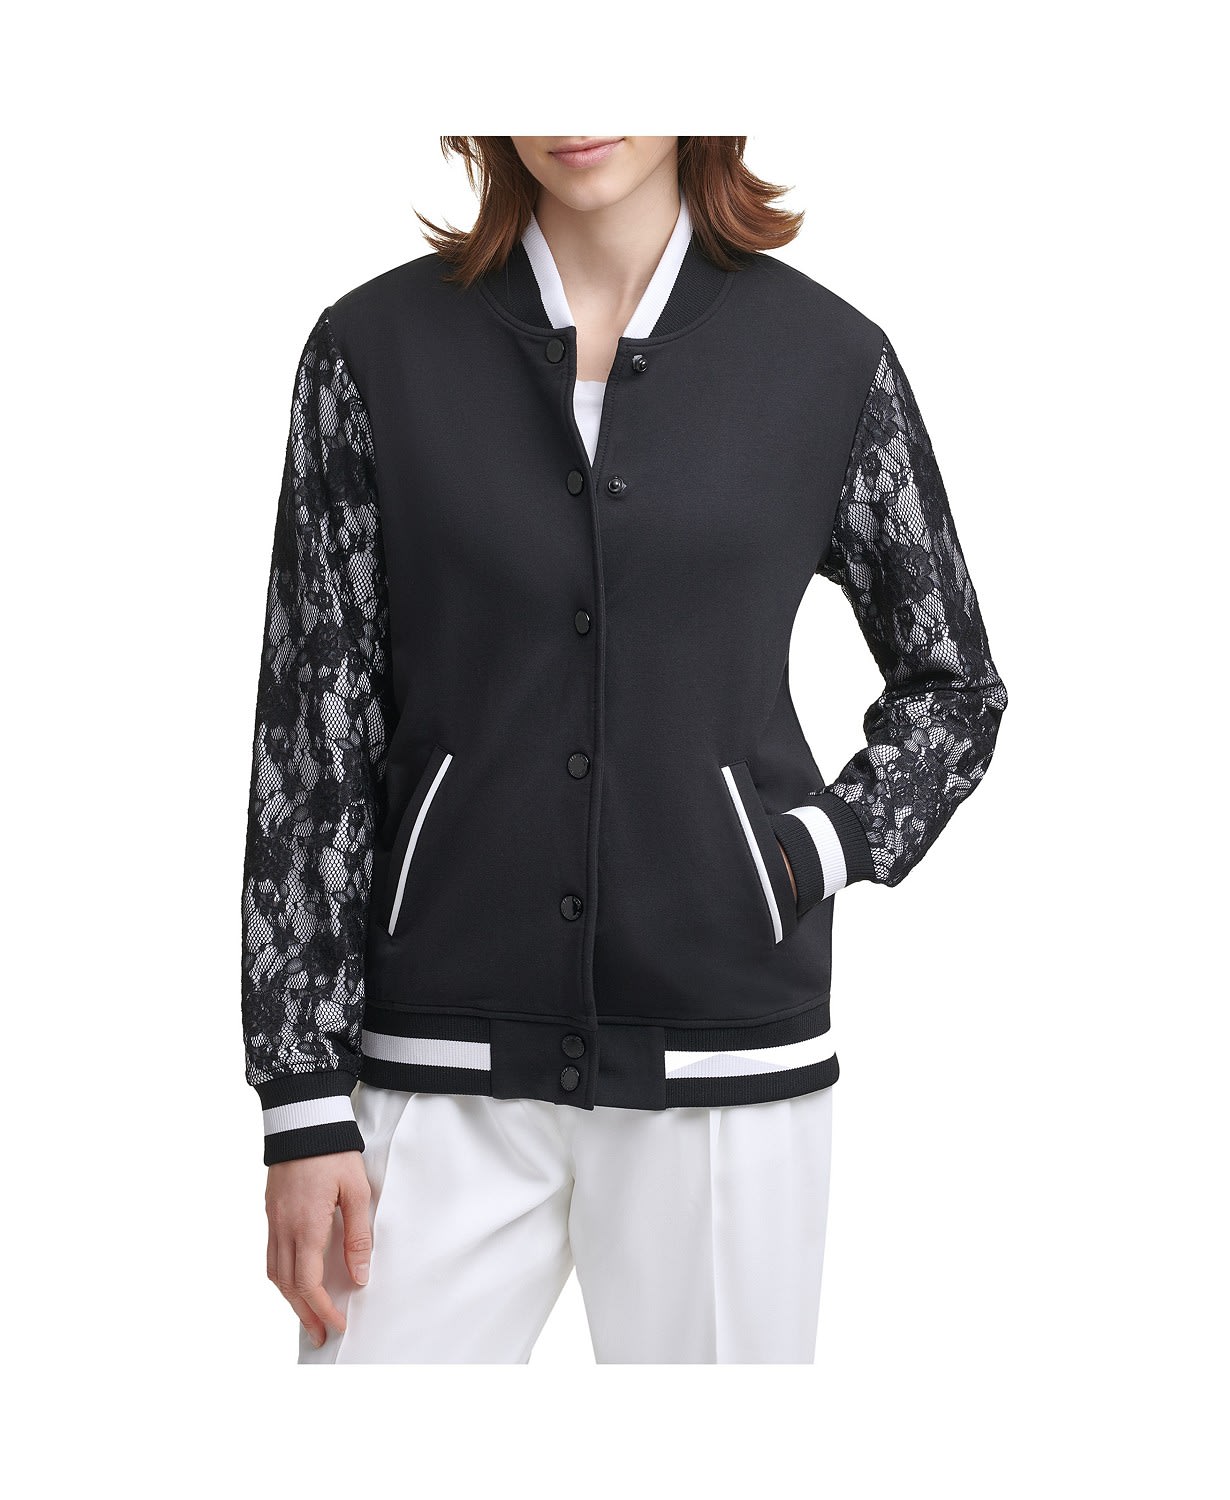 12 best bomber jackets for women in 2021 - TODAY